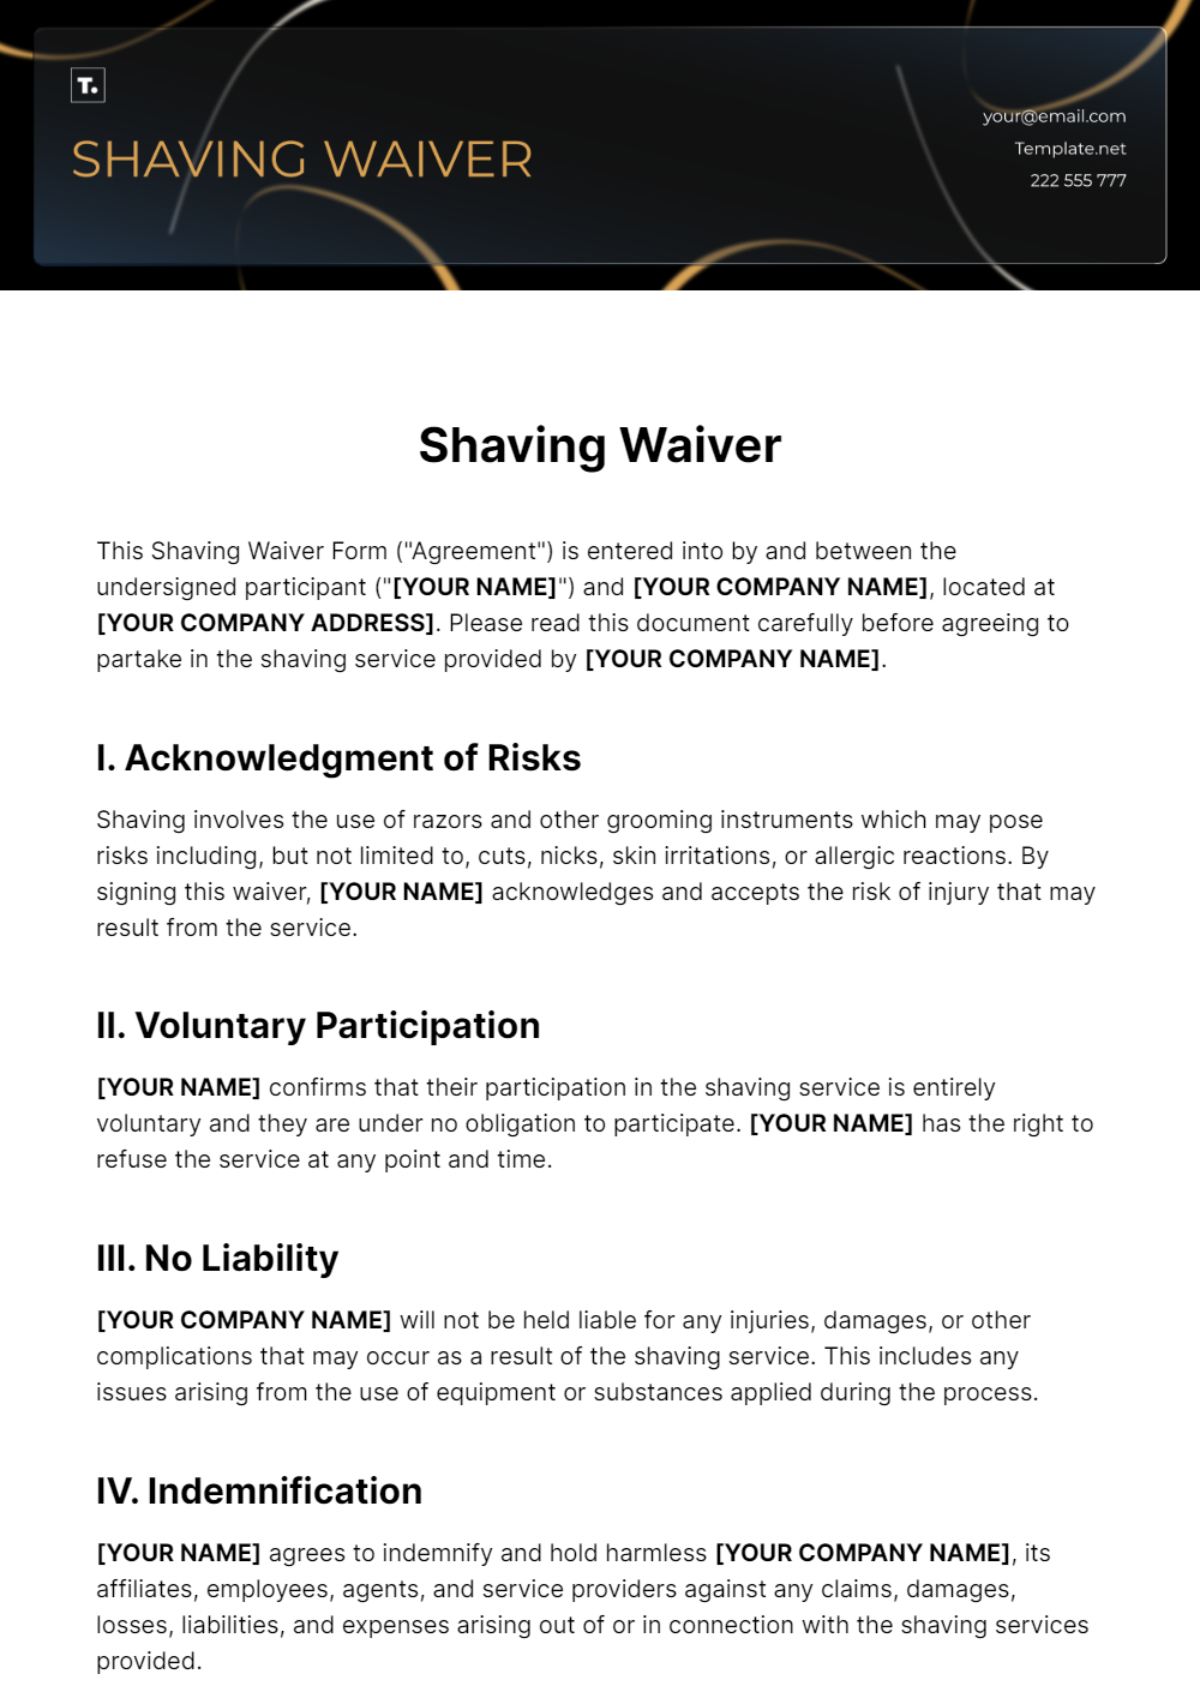 Free Shaving Waiver Template